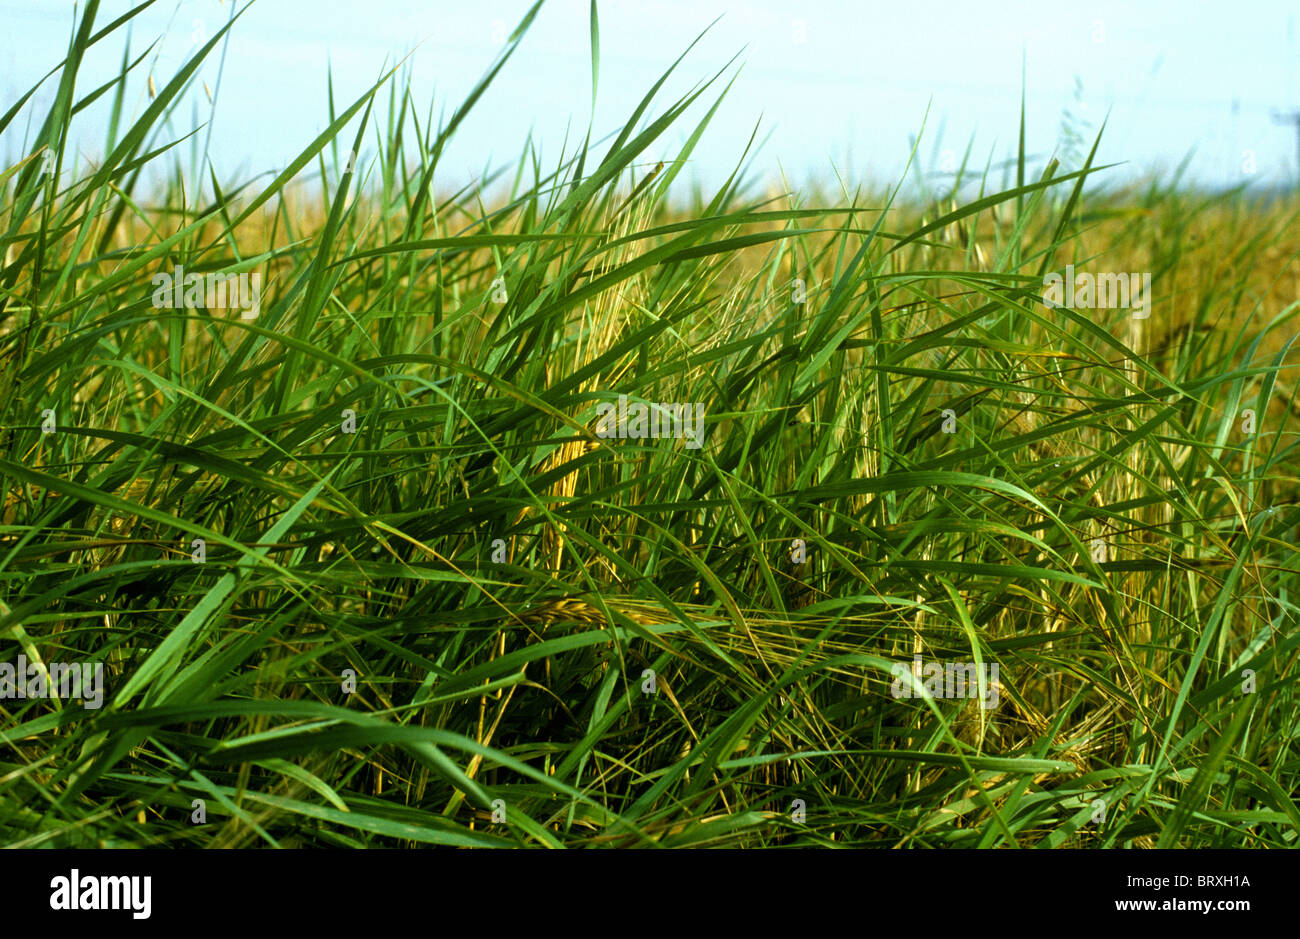 Couch grass, (Agropyron repens) infestation in a ripe barley crop Stock Photo